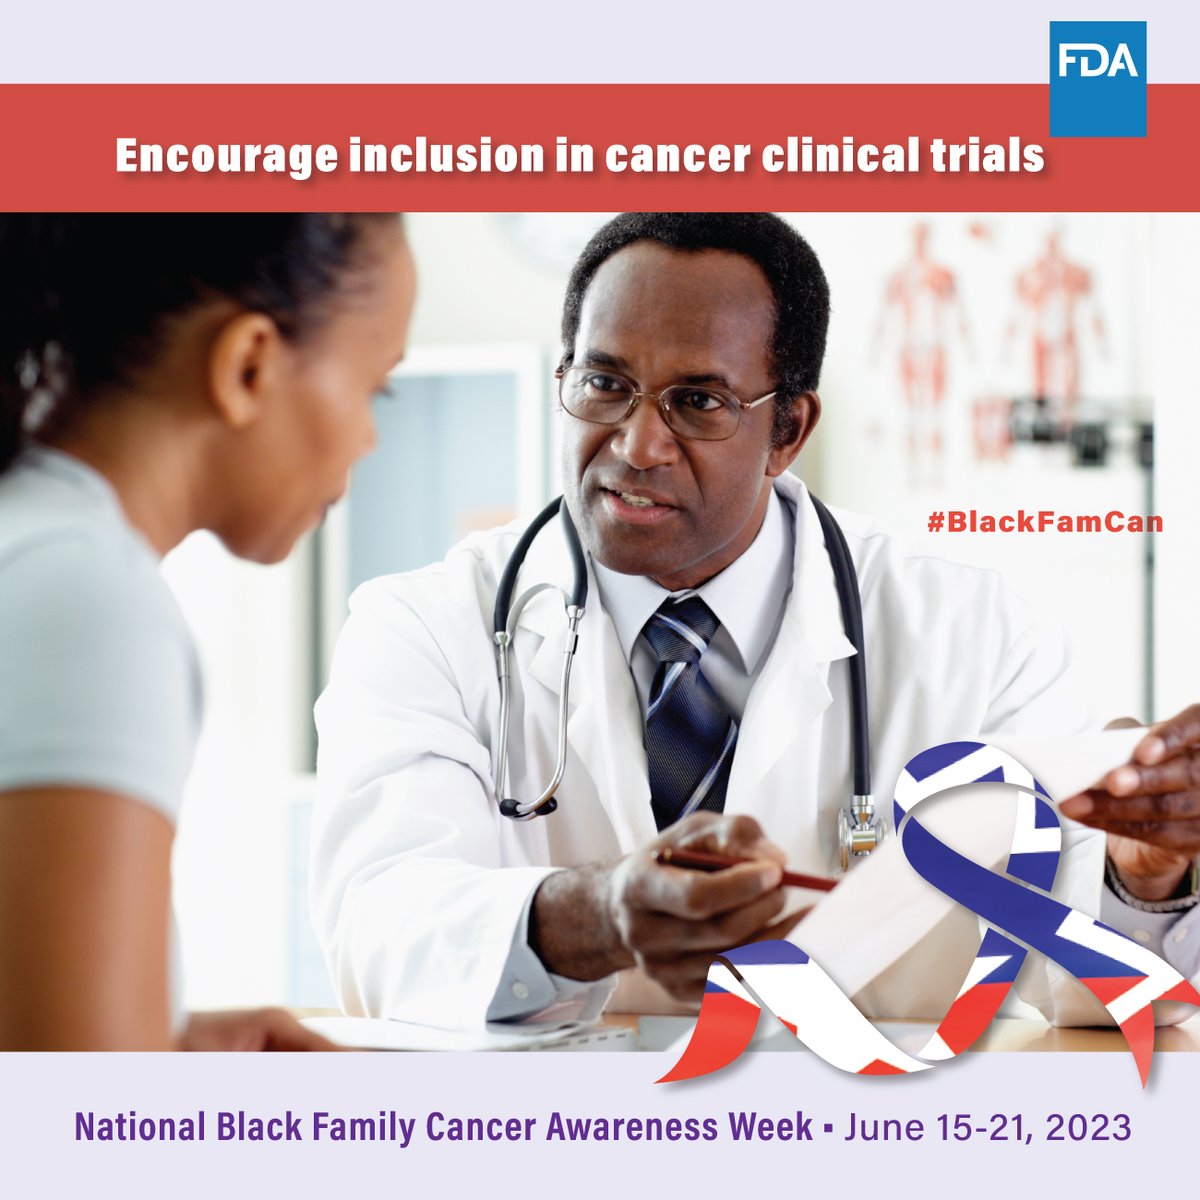 Black individuals with cancer participate in #ClinicalTrials at lower rates than White individuals. This National Black Family Cancer Awareness Week, we’re spreading awareness and the need for #HealthEquity in clinical trials. #BlackFamCan (@US_FDA)